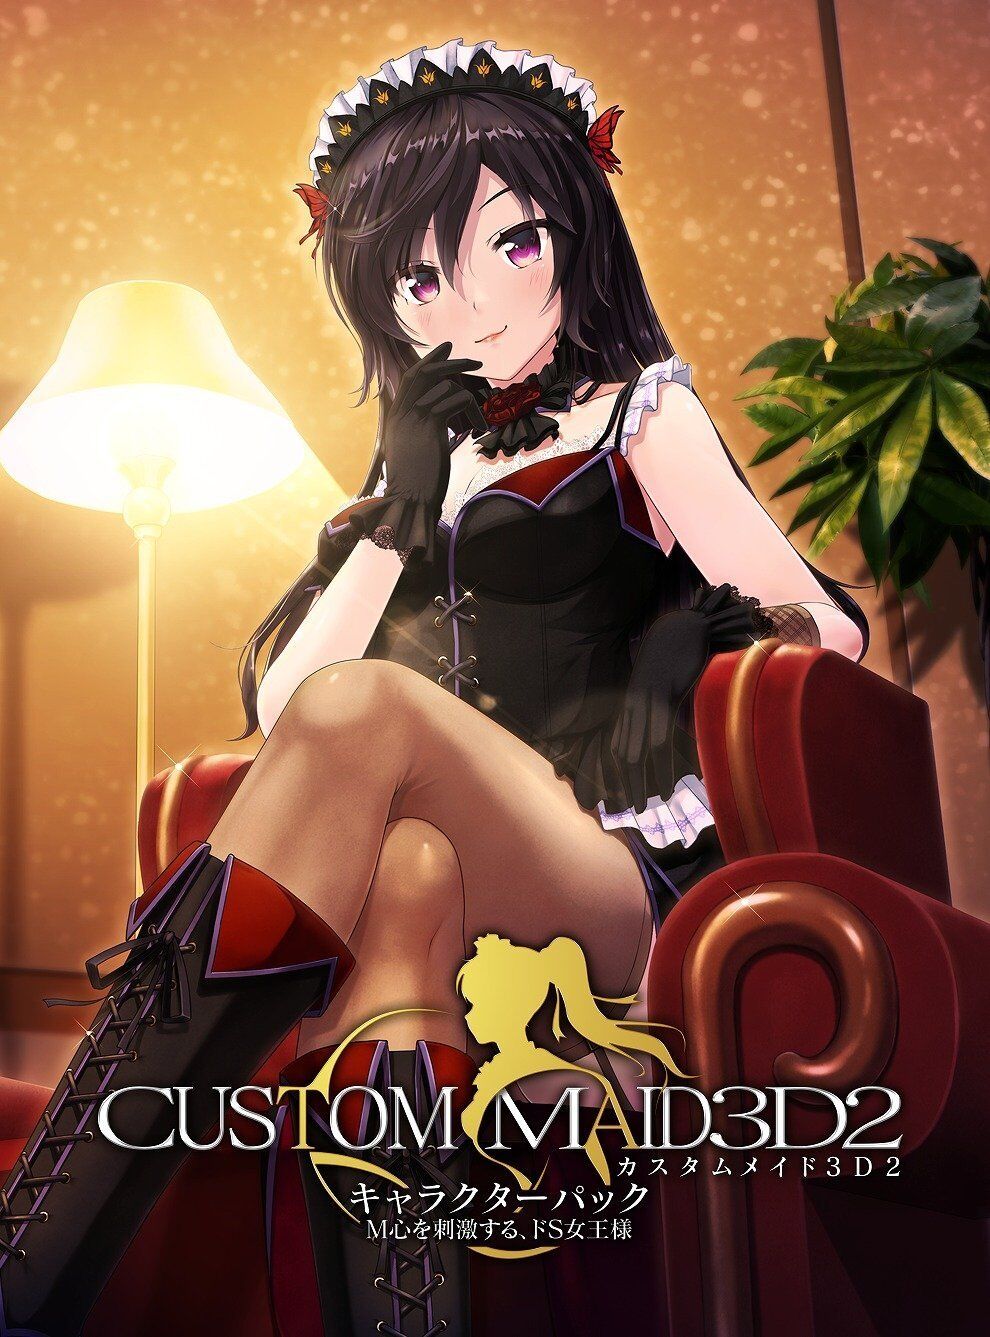 cheryl rothschild recommends custom maid 3d controller pic